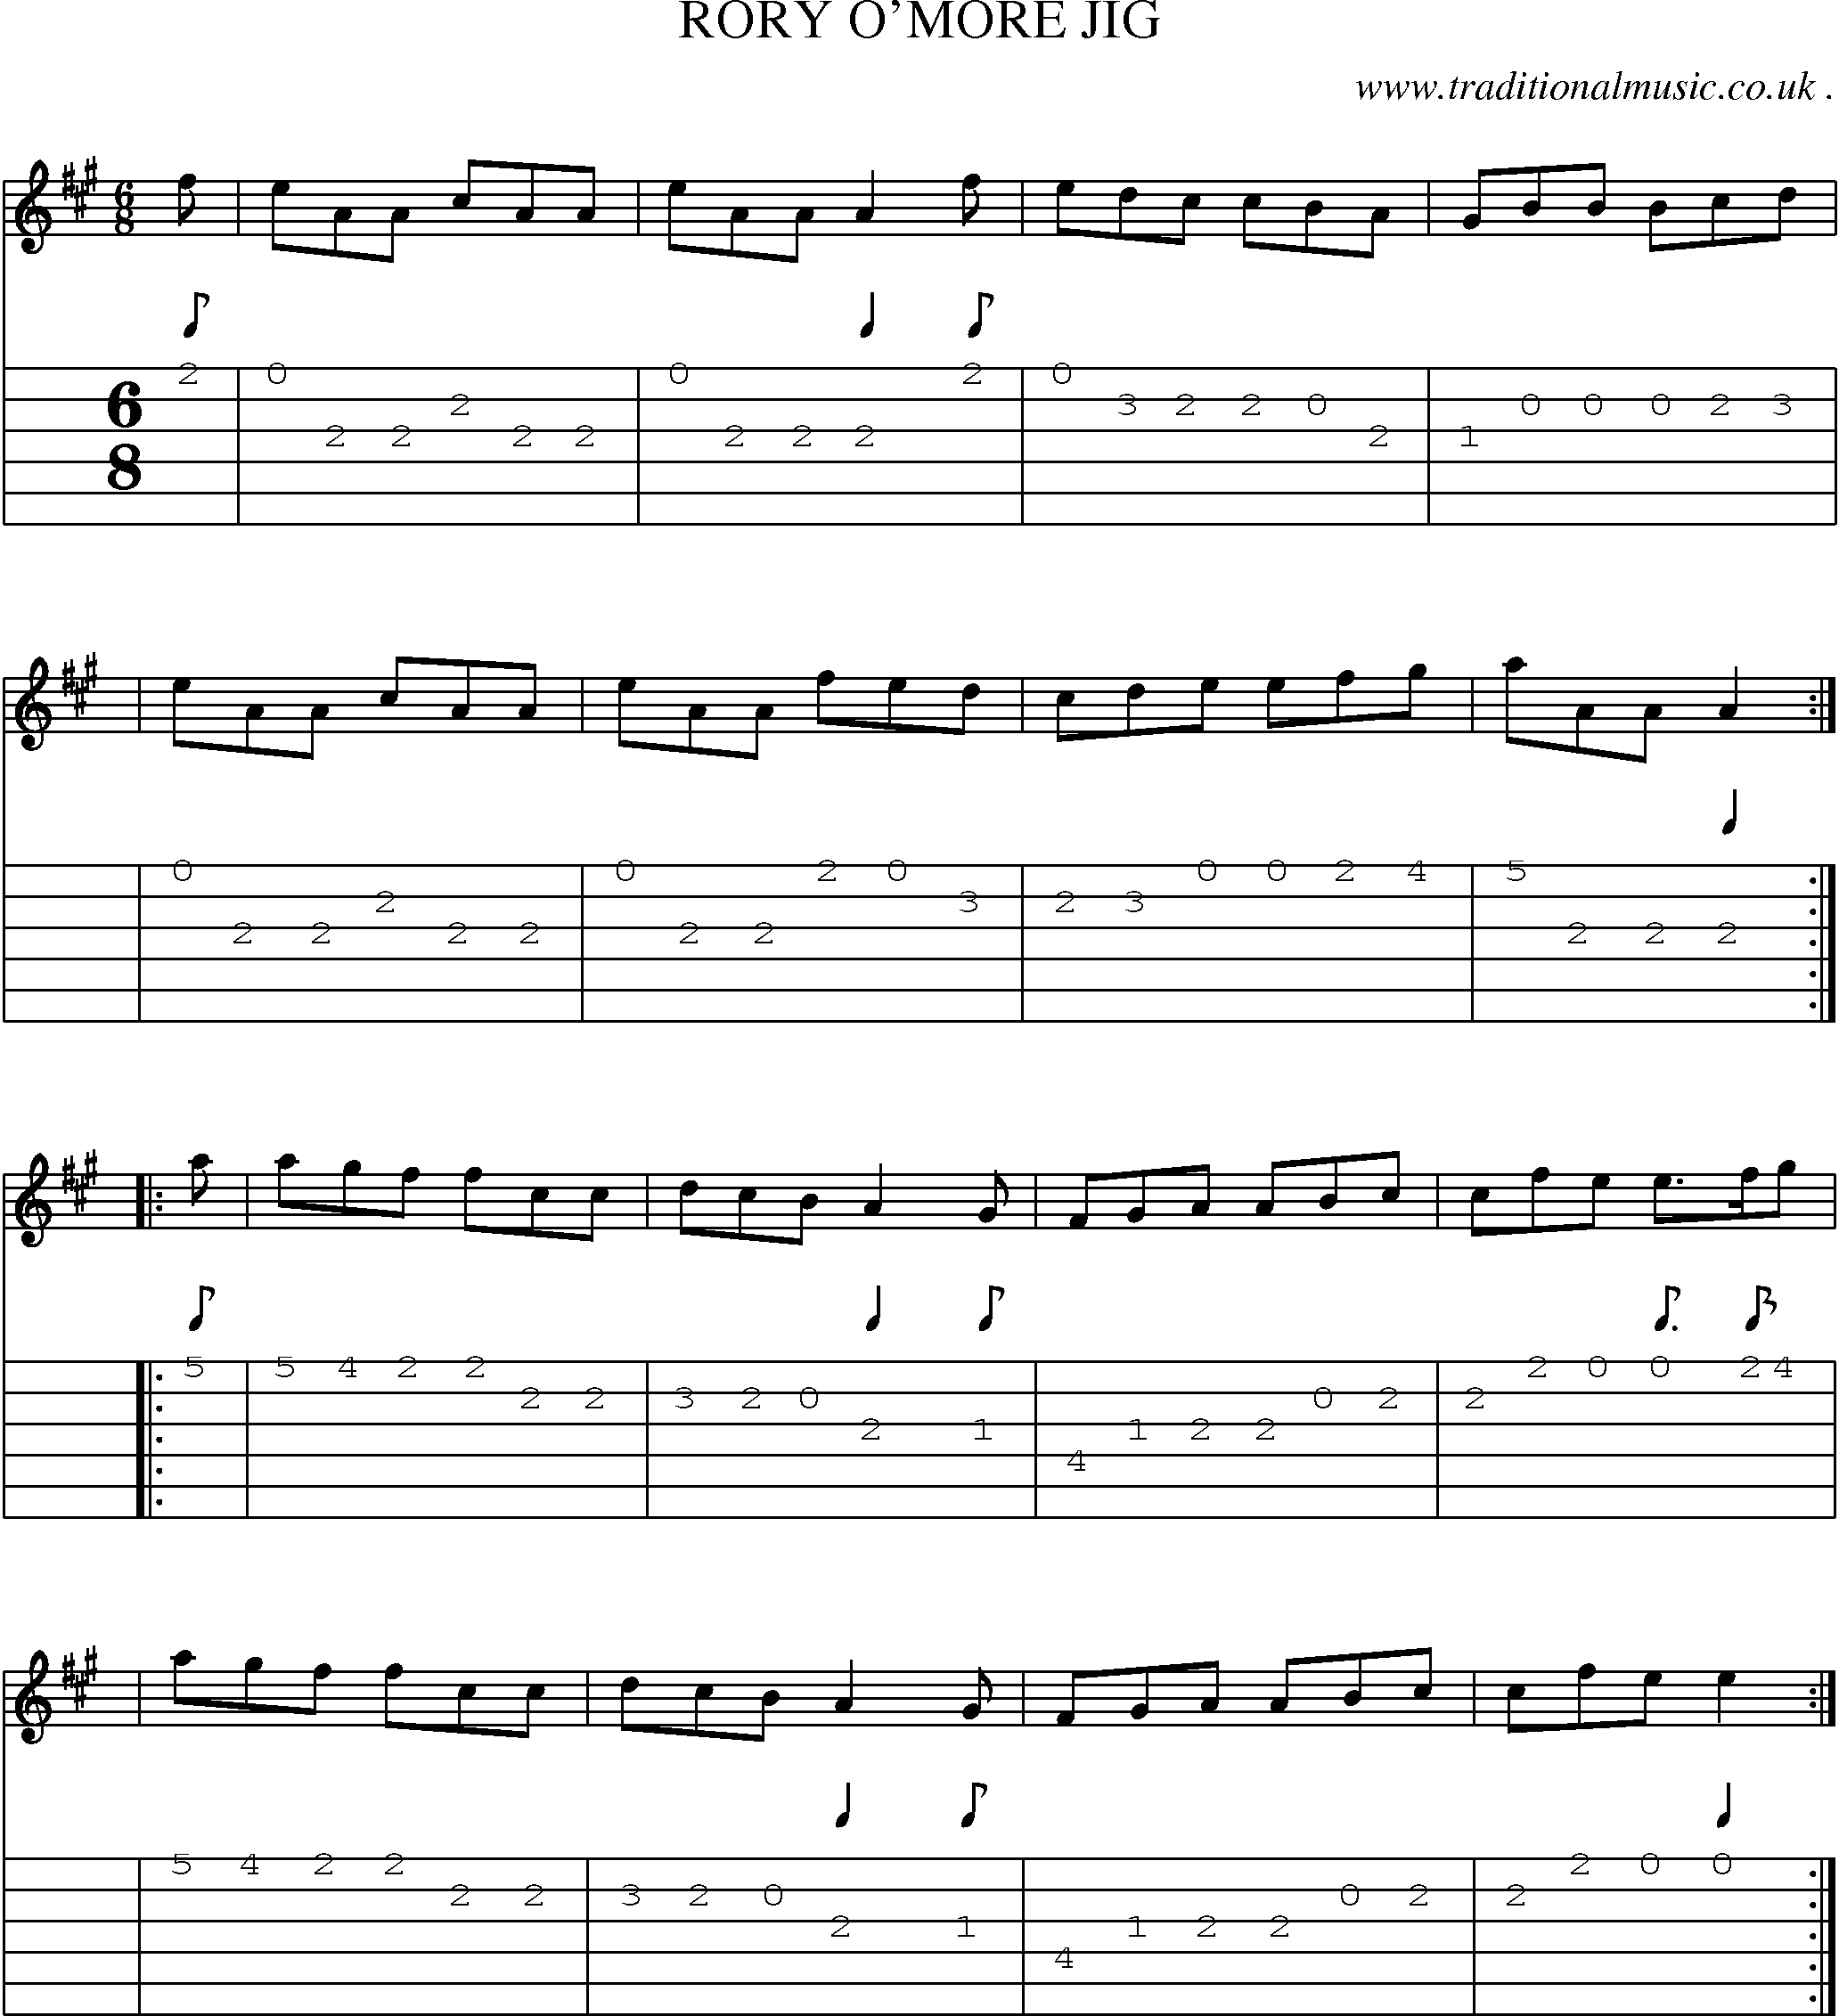 Sheet-Music and Guitar Tabs for Rory Omore Jig